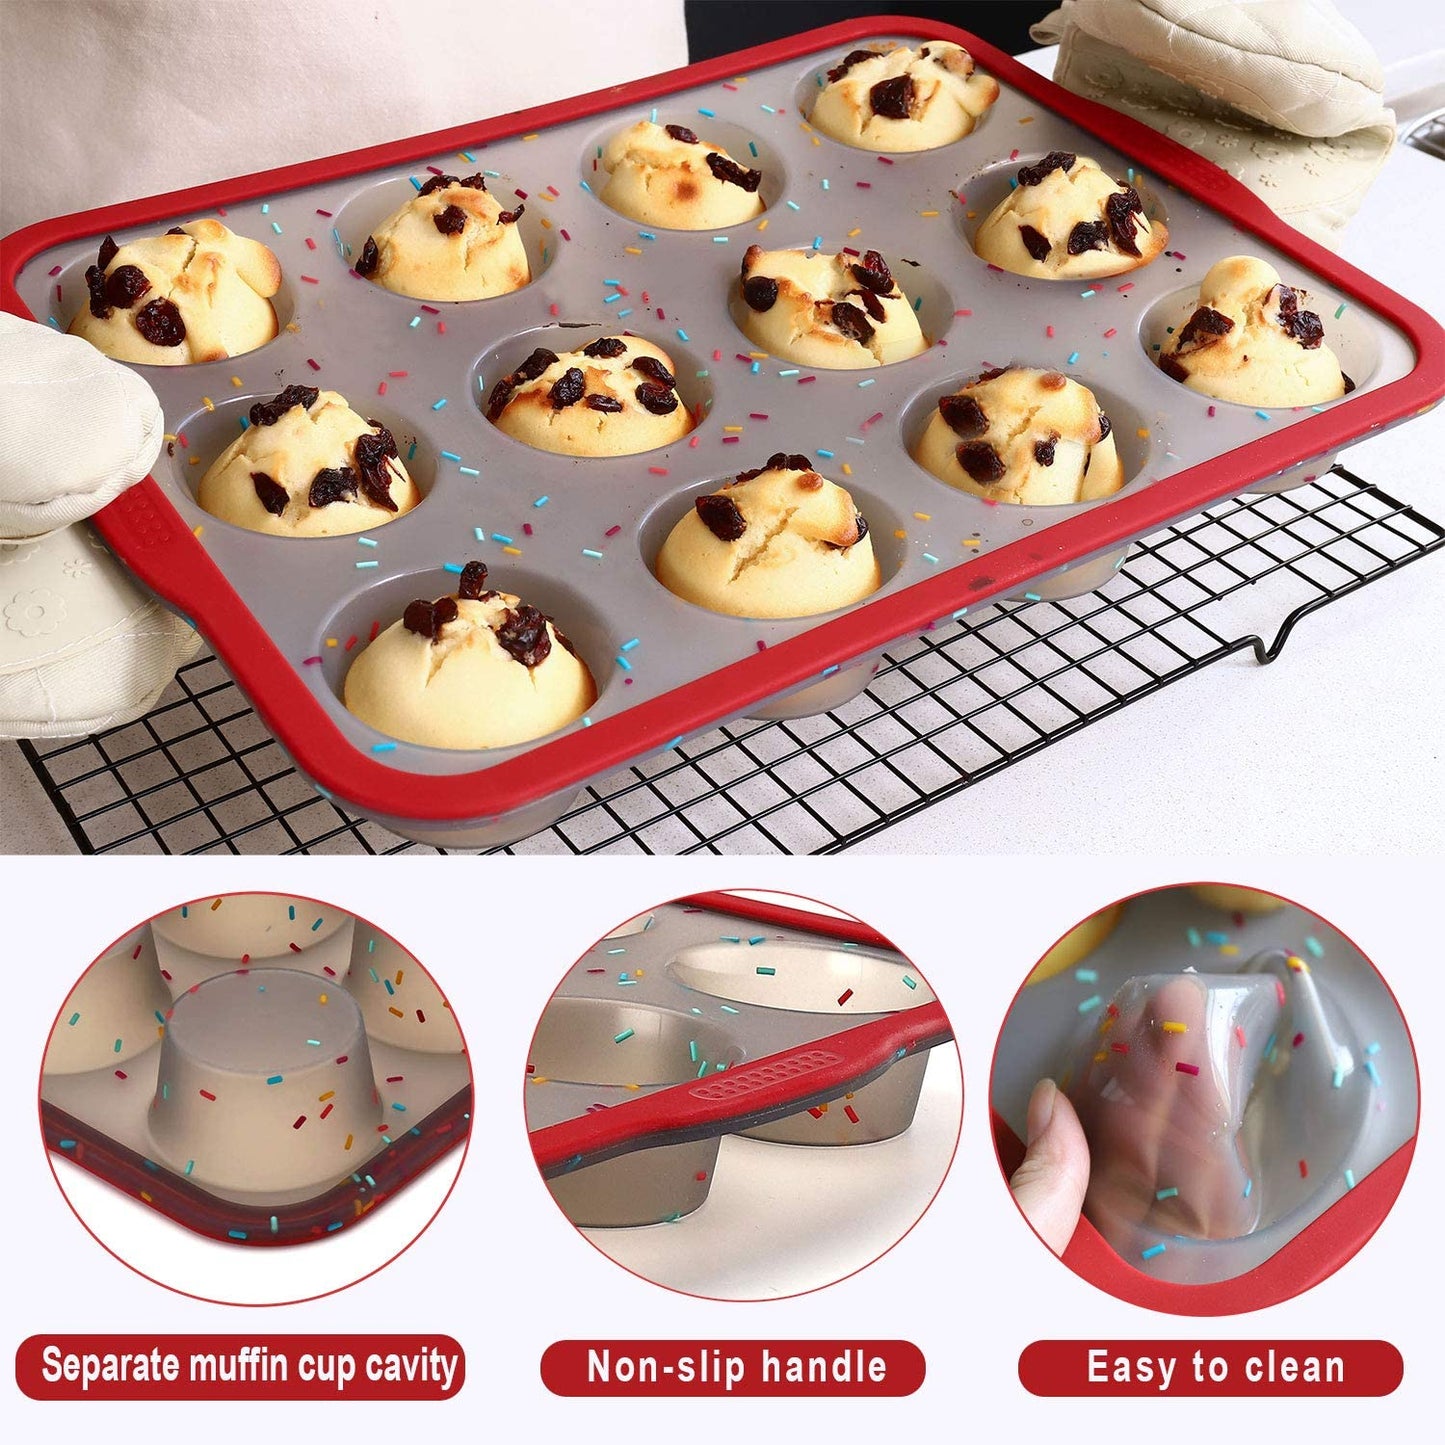 12 Cup Silicone Muffin Tray, Non-Stick Muffin Tins Baking Mould, 12 Holes Muffin Mould,Muffin Pan